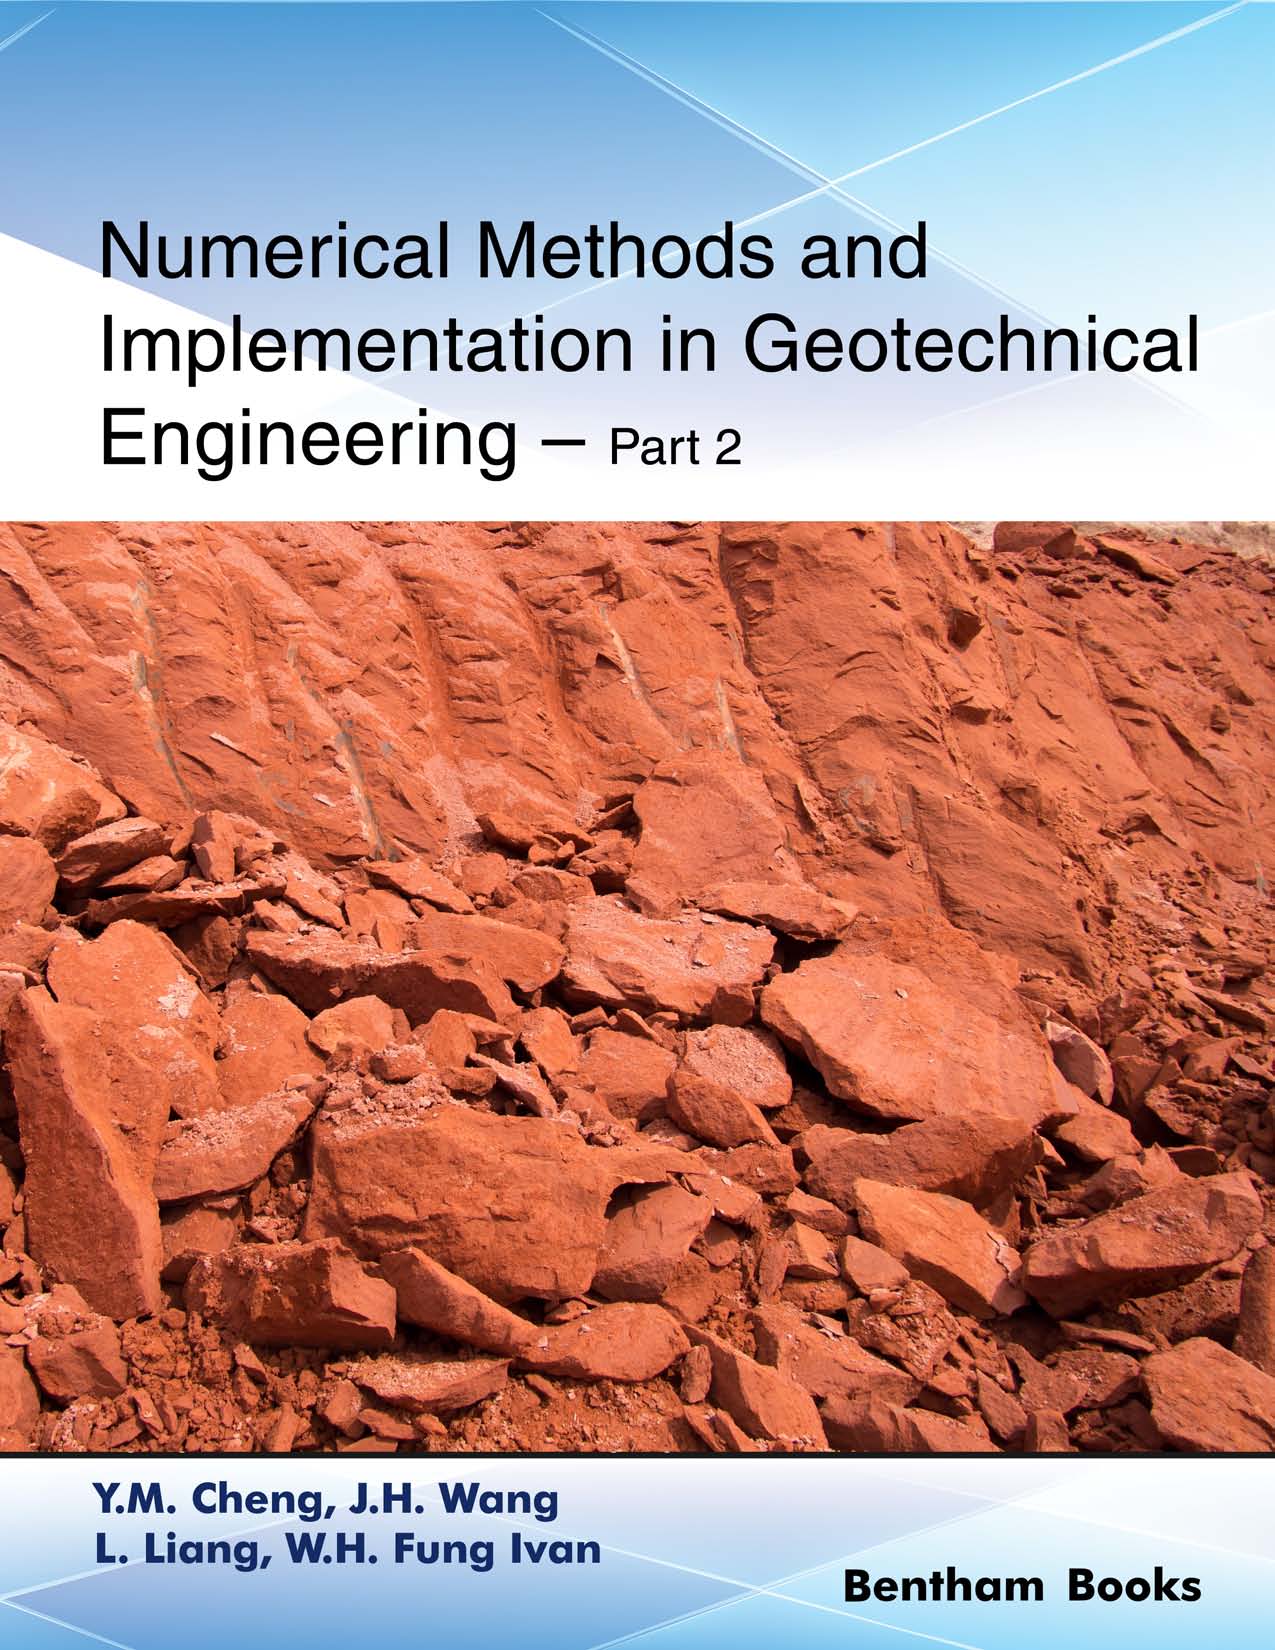 Numerical Methods and Implementation in Geotechnical Engineering – Part 2